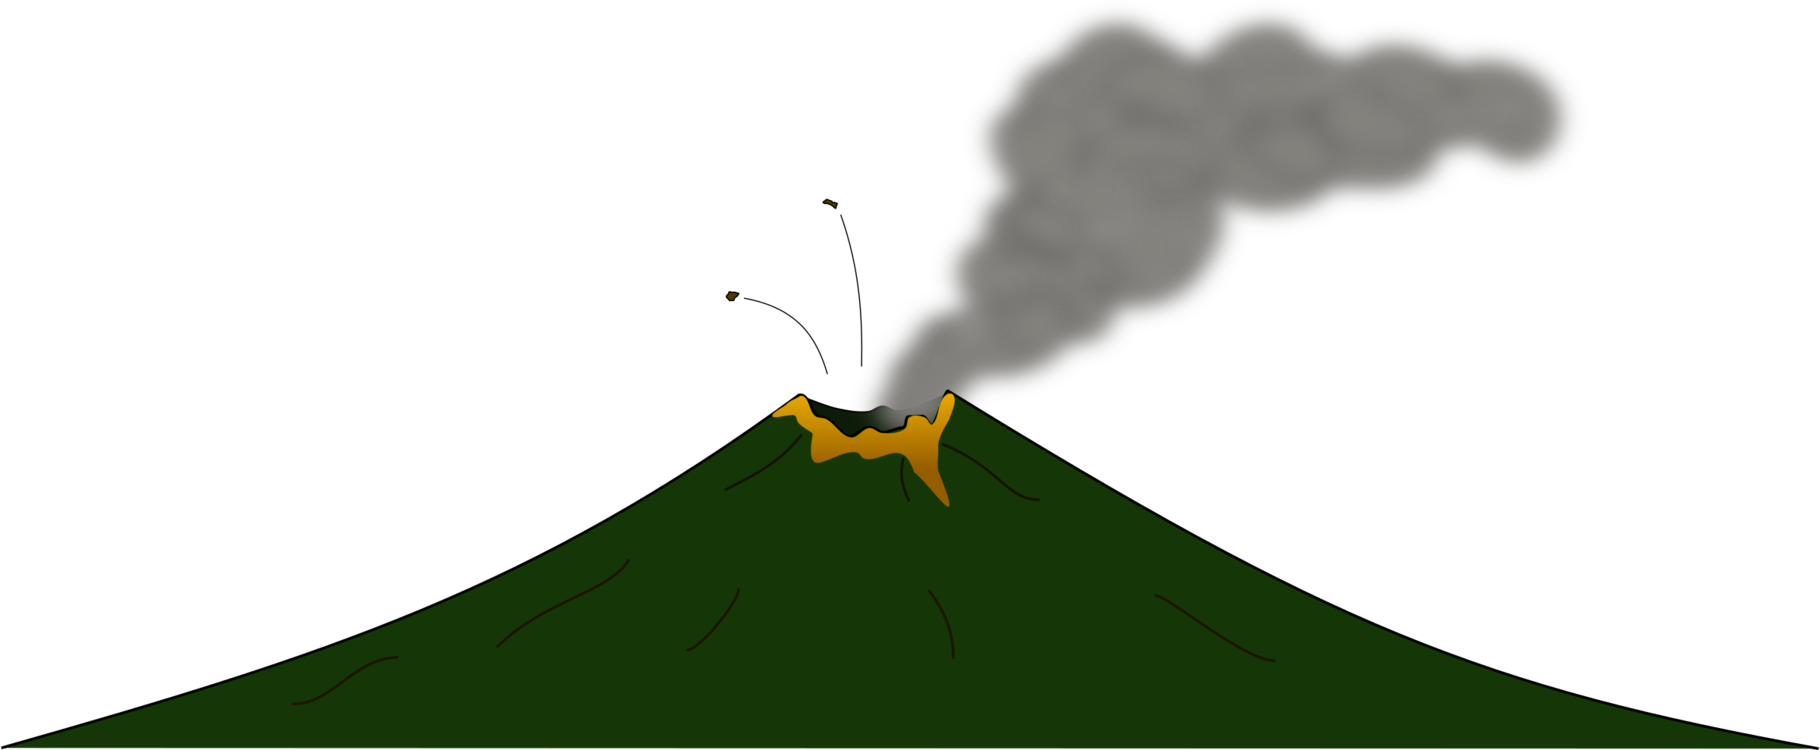 Clipart mountain volcanic mountain. Leaf sky tree png